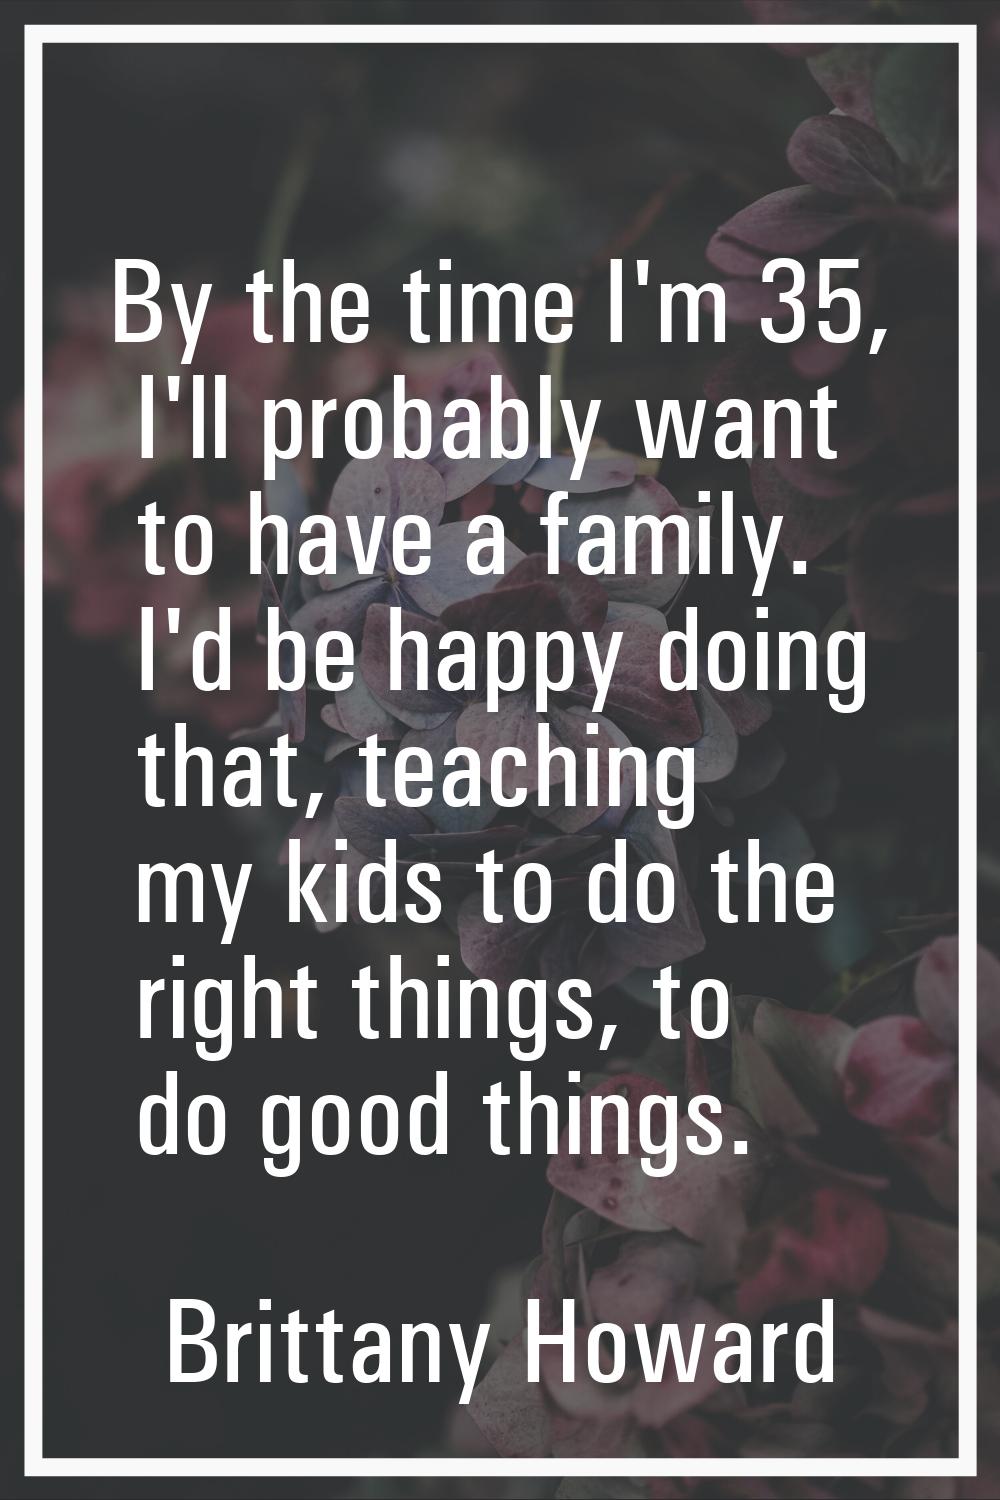 By the time I'm 35, I'll probably want to have a family. I'd be happy doing that, teaching my kids 